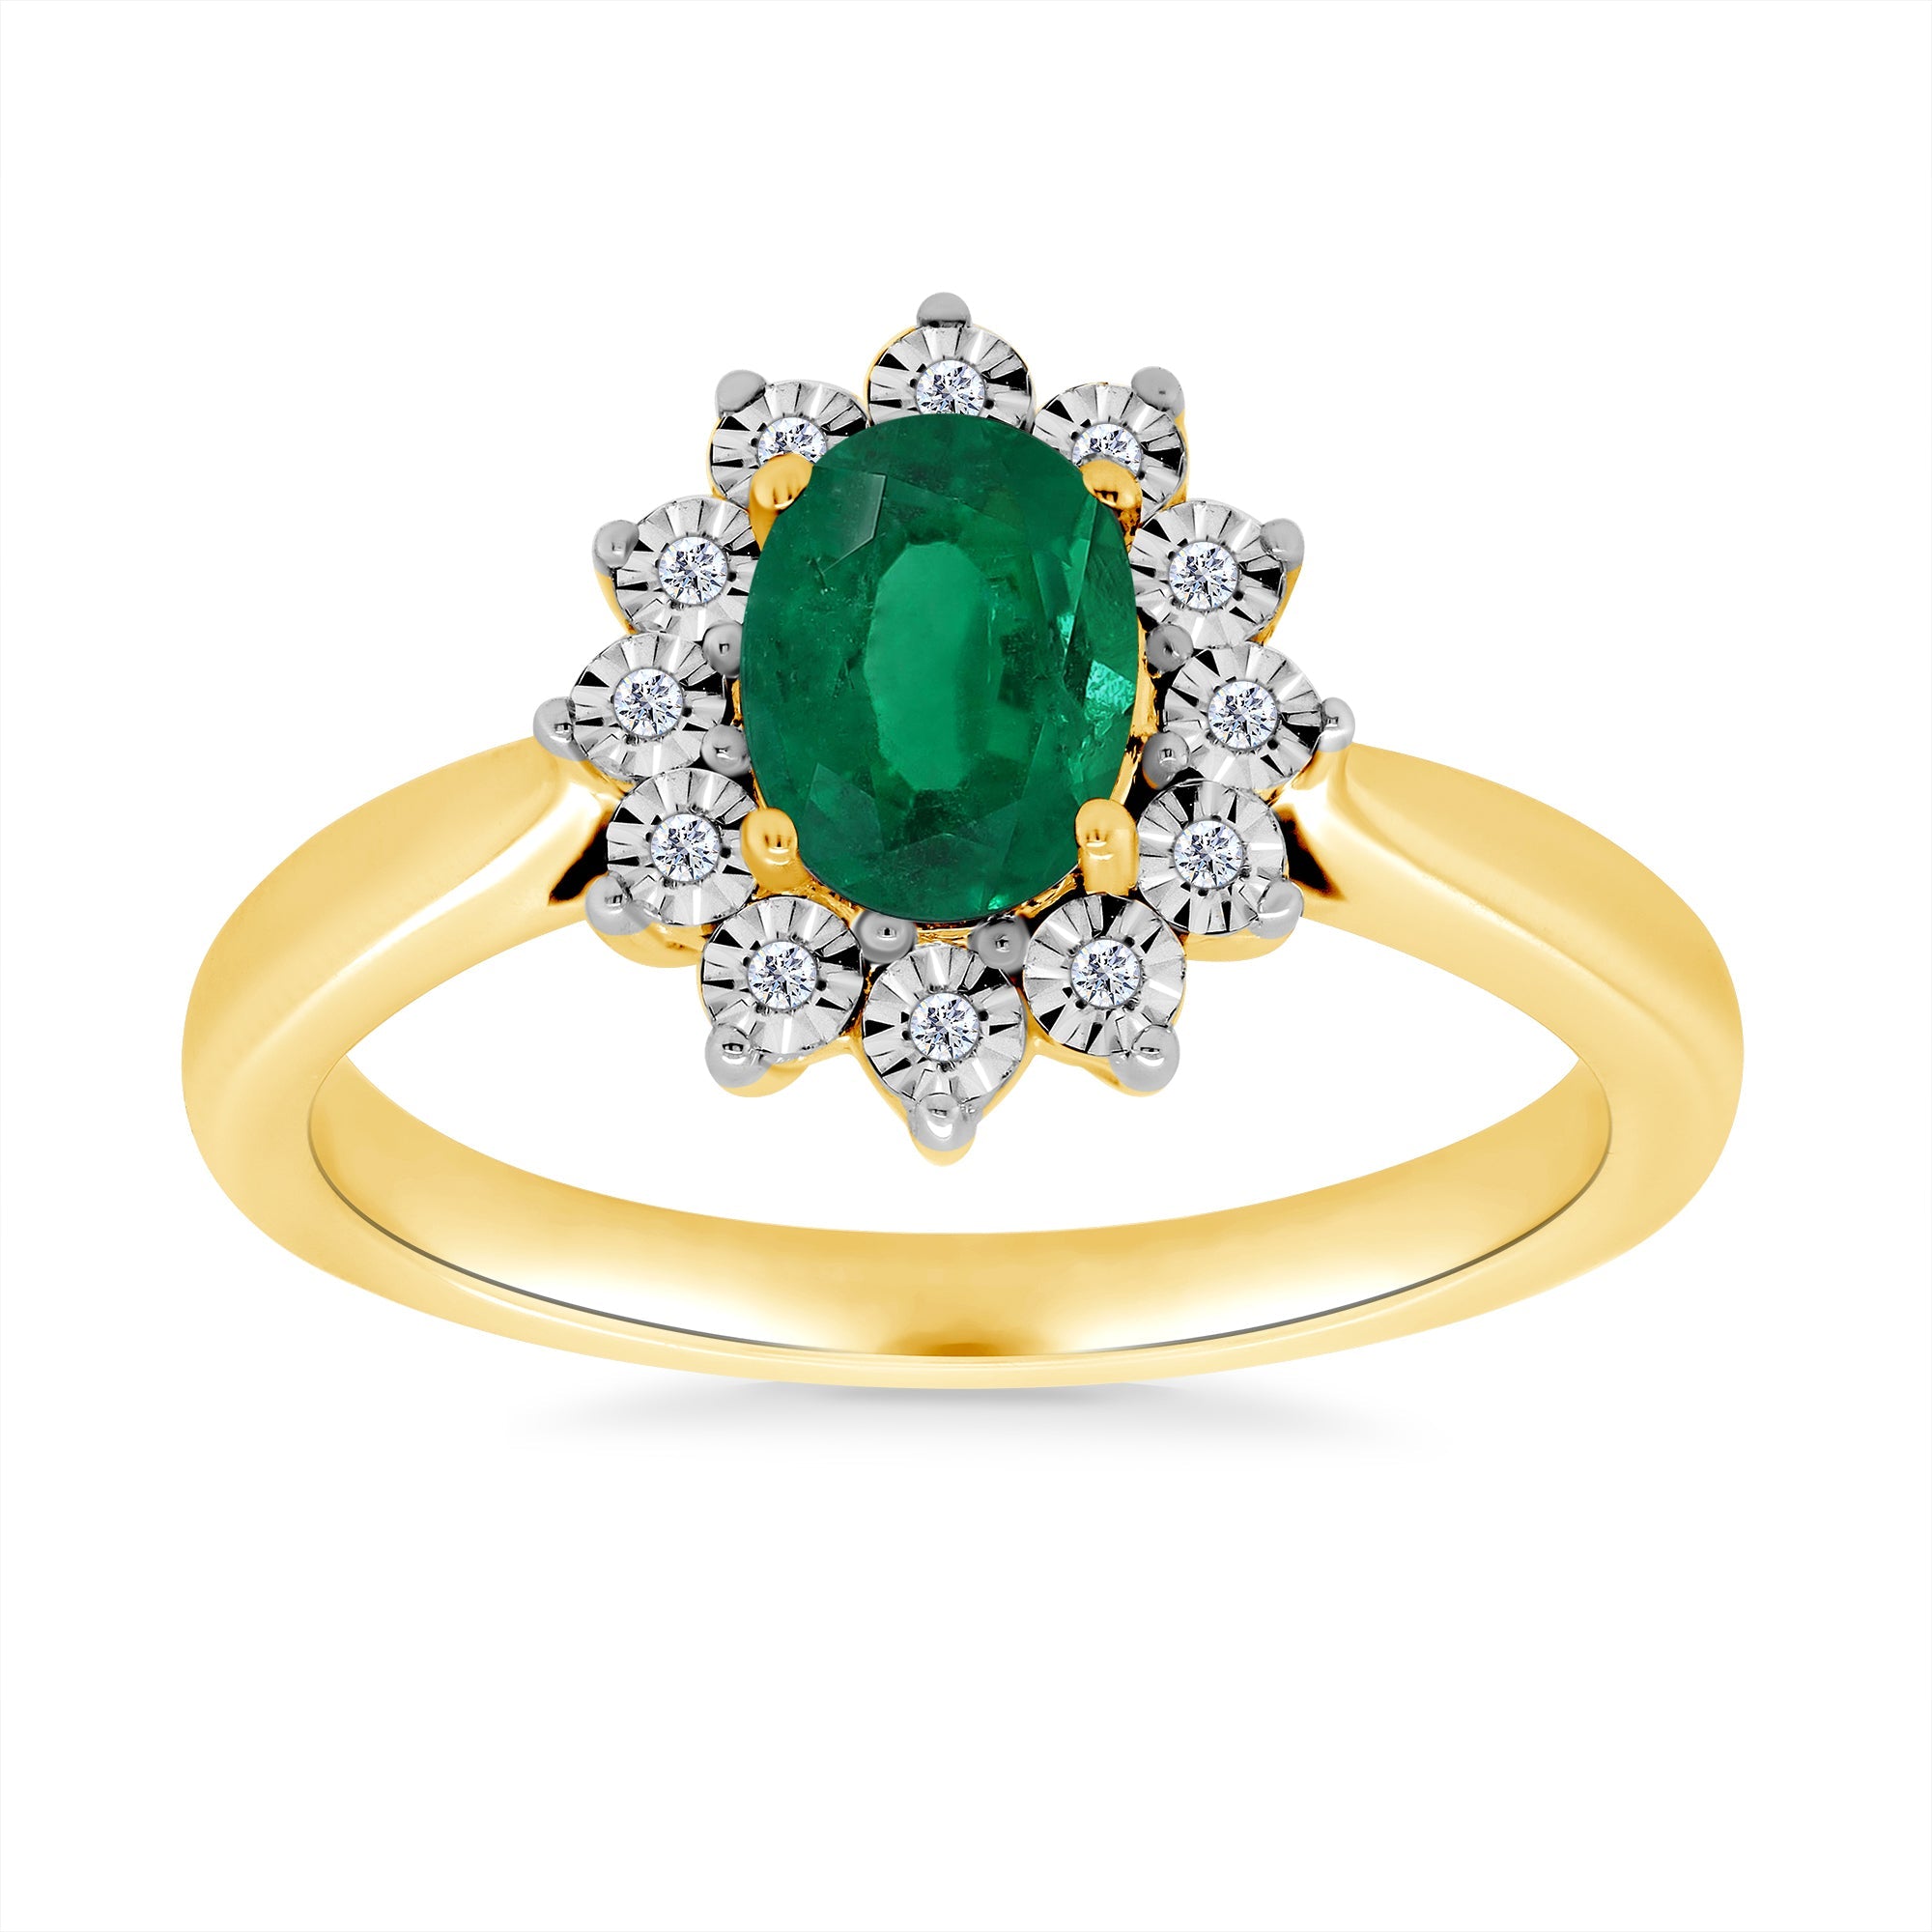 9ct gold 7x5mm oval emerald & miracle plate diamond cluster ring 0.04ct